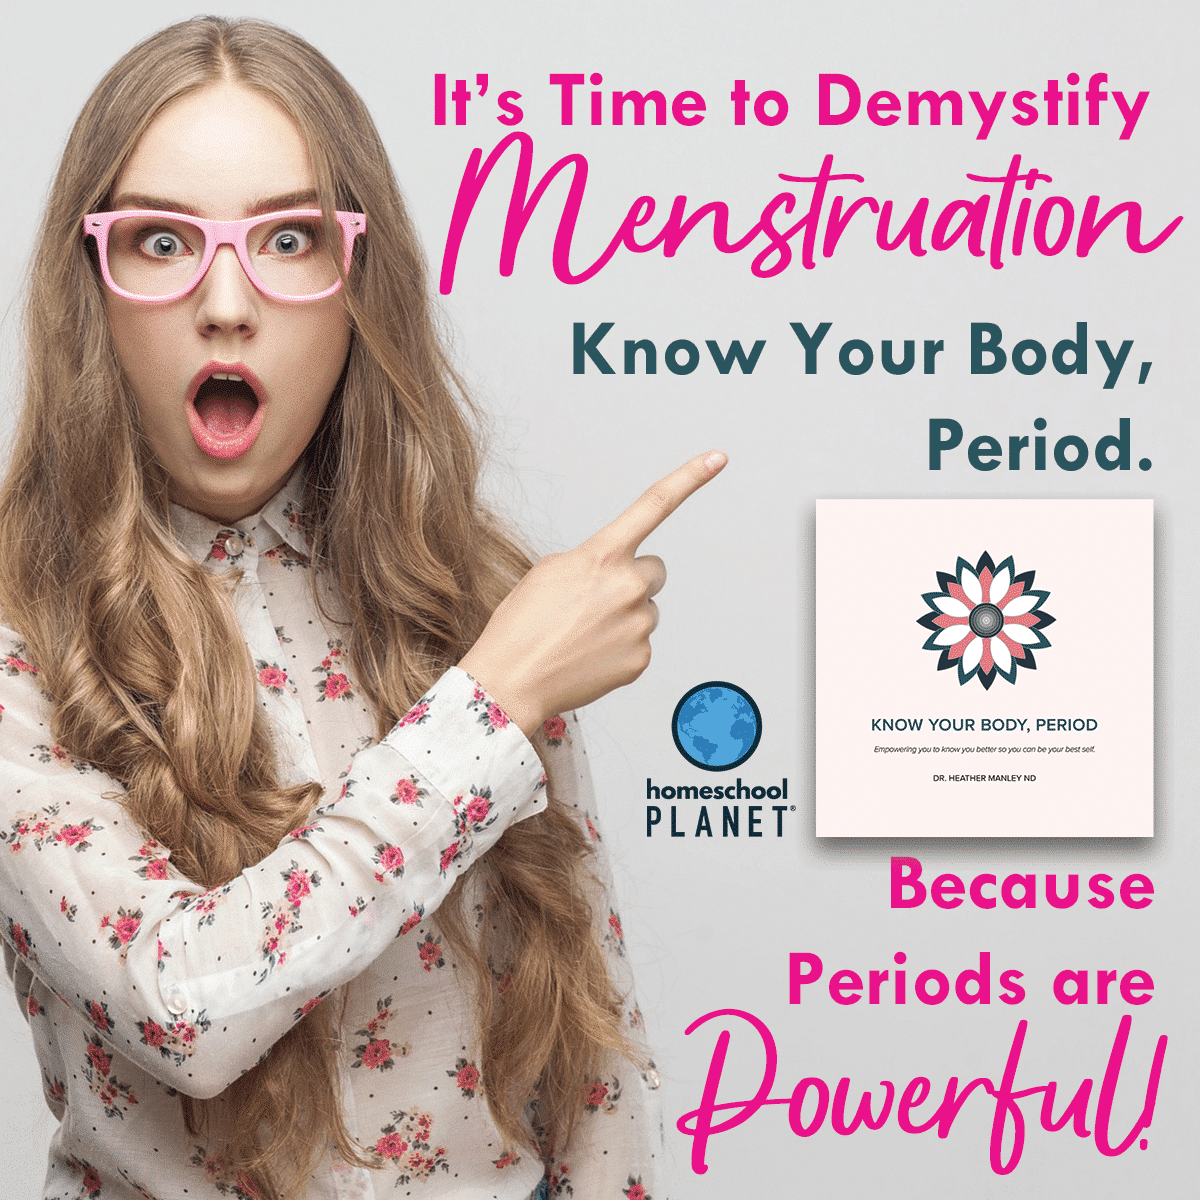 It’s Time to Demystify Menstruation for Good: Know Your Body, Period.